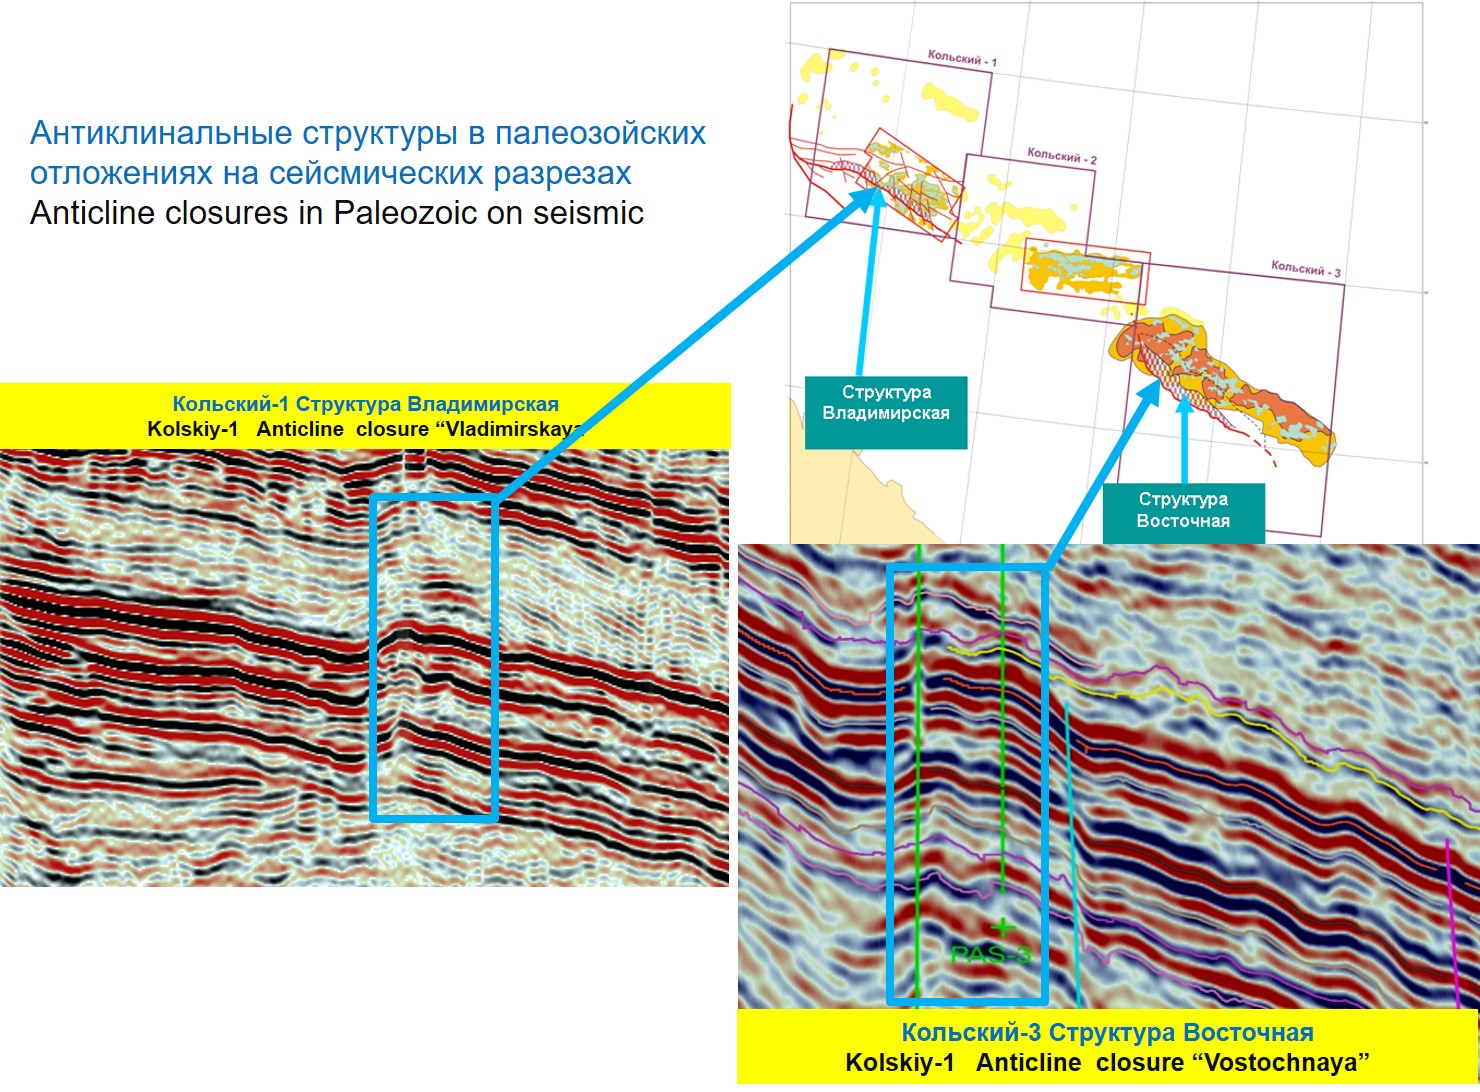 Anticlinal structures in Paleozoic sediments in seismic sections 